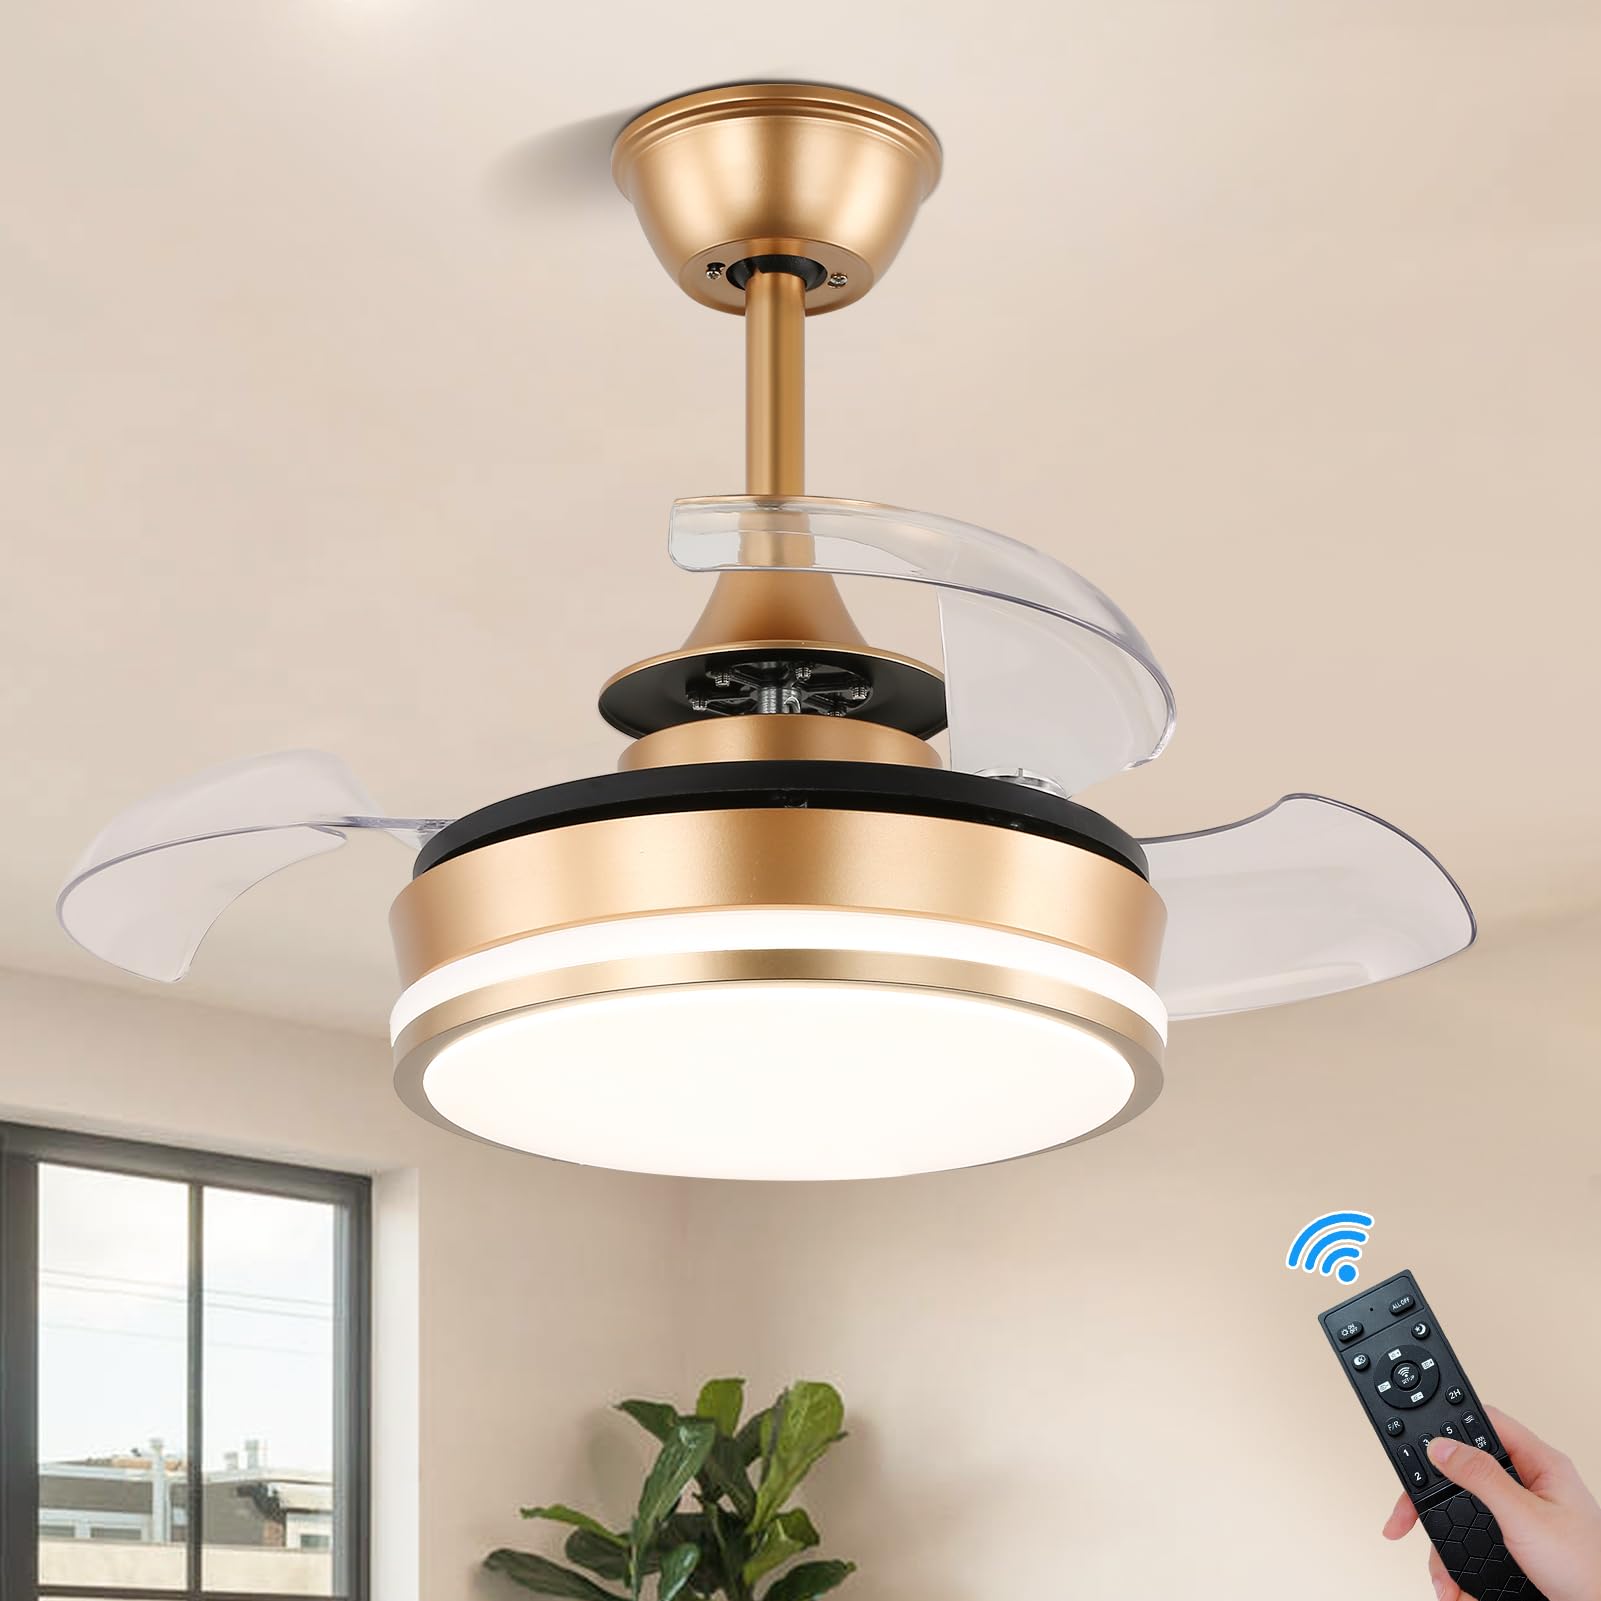 Small Ceiling Fans with Lights 22'' Gold Chandelier Ceiling Fans Dimmable, Semi Flush Mount Ceiling Fans Low Decibel 6 Speeds, LED Fandelier Retractable Blades for Small Spaces, Kid Rooms